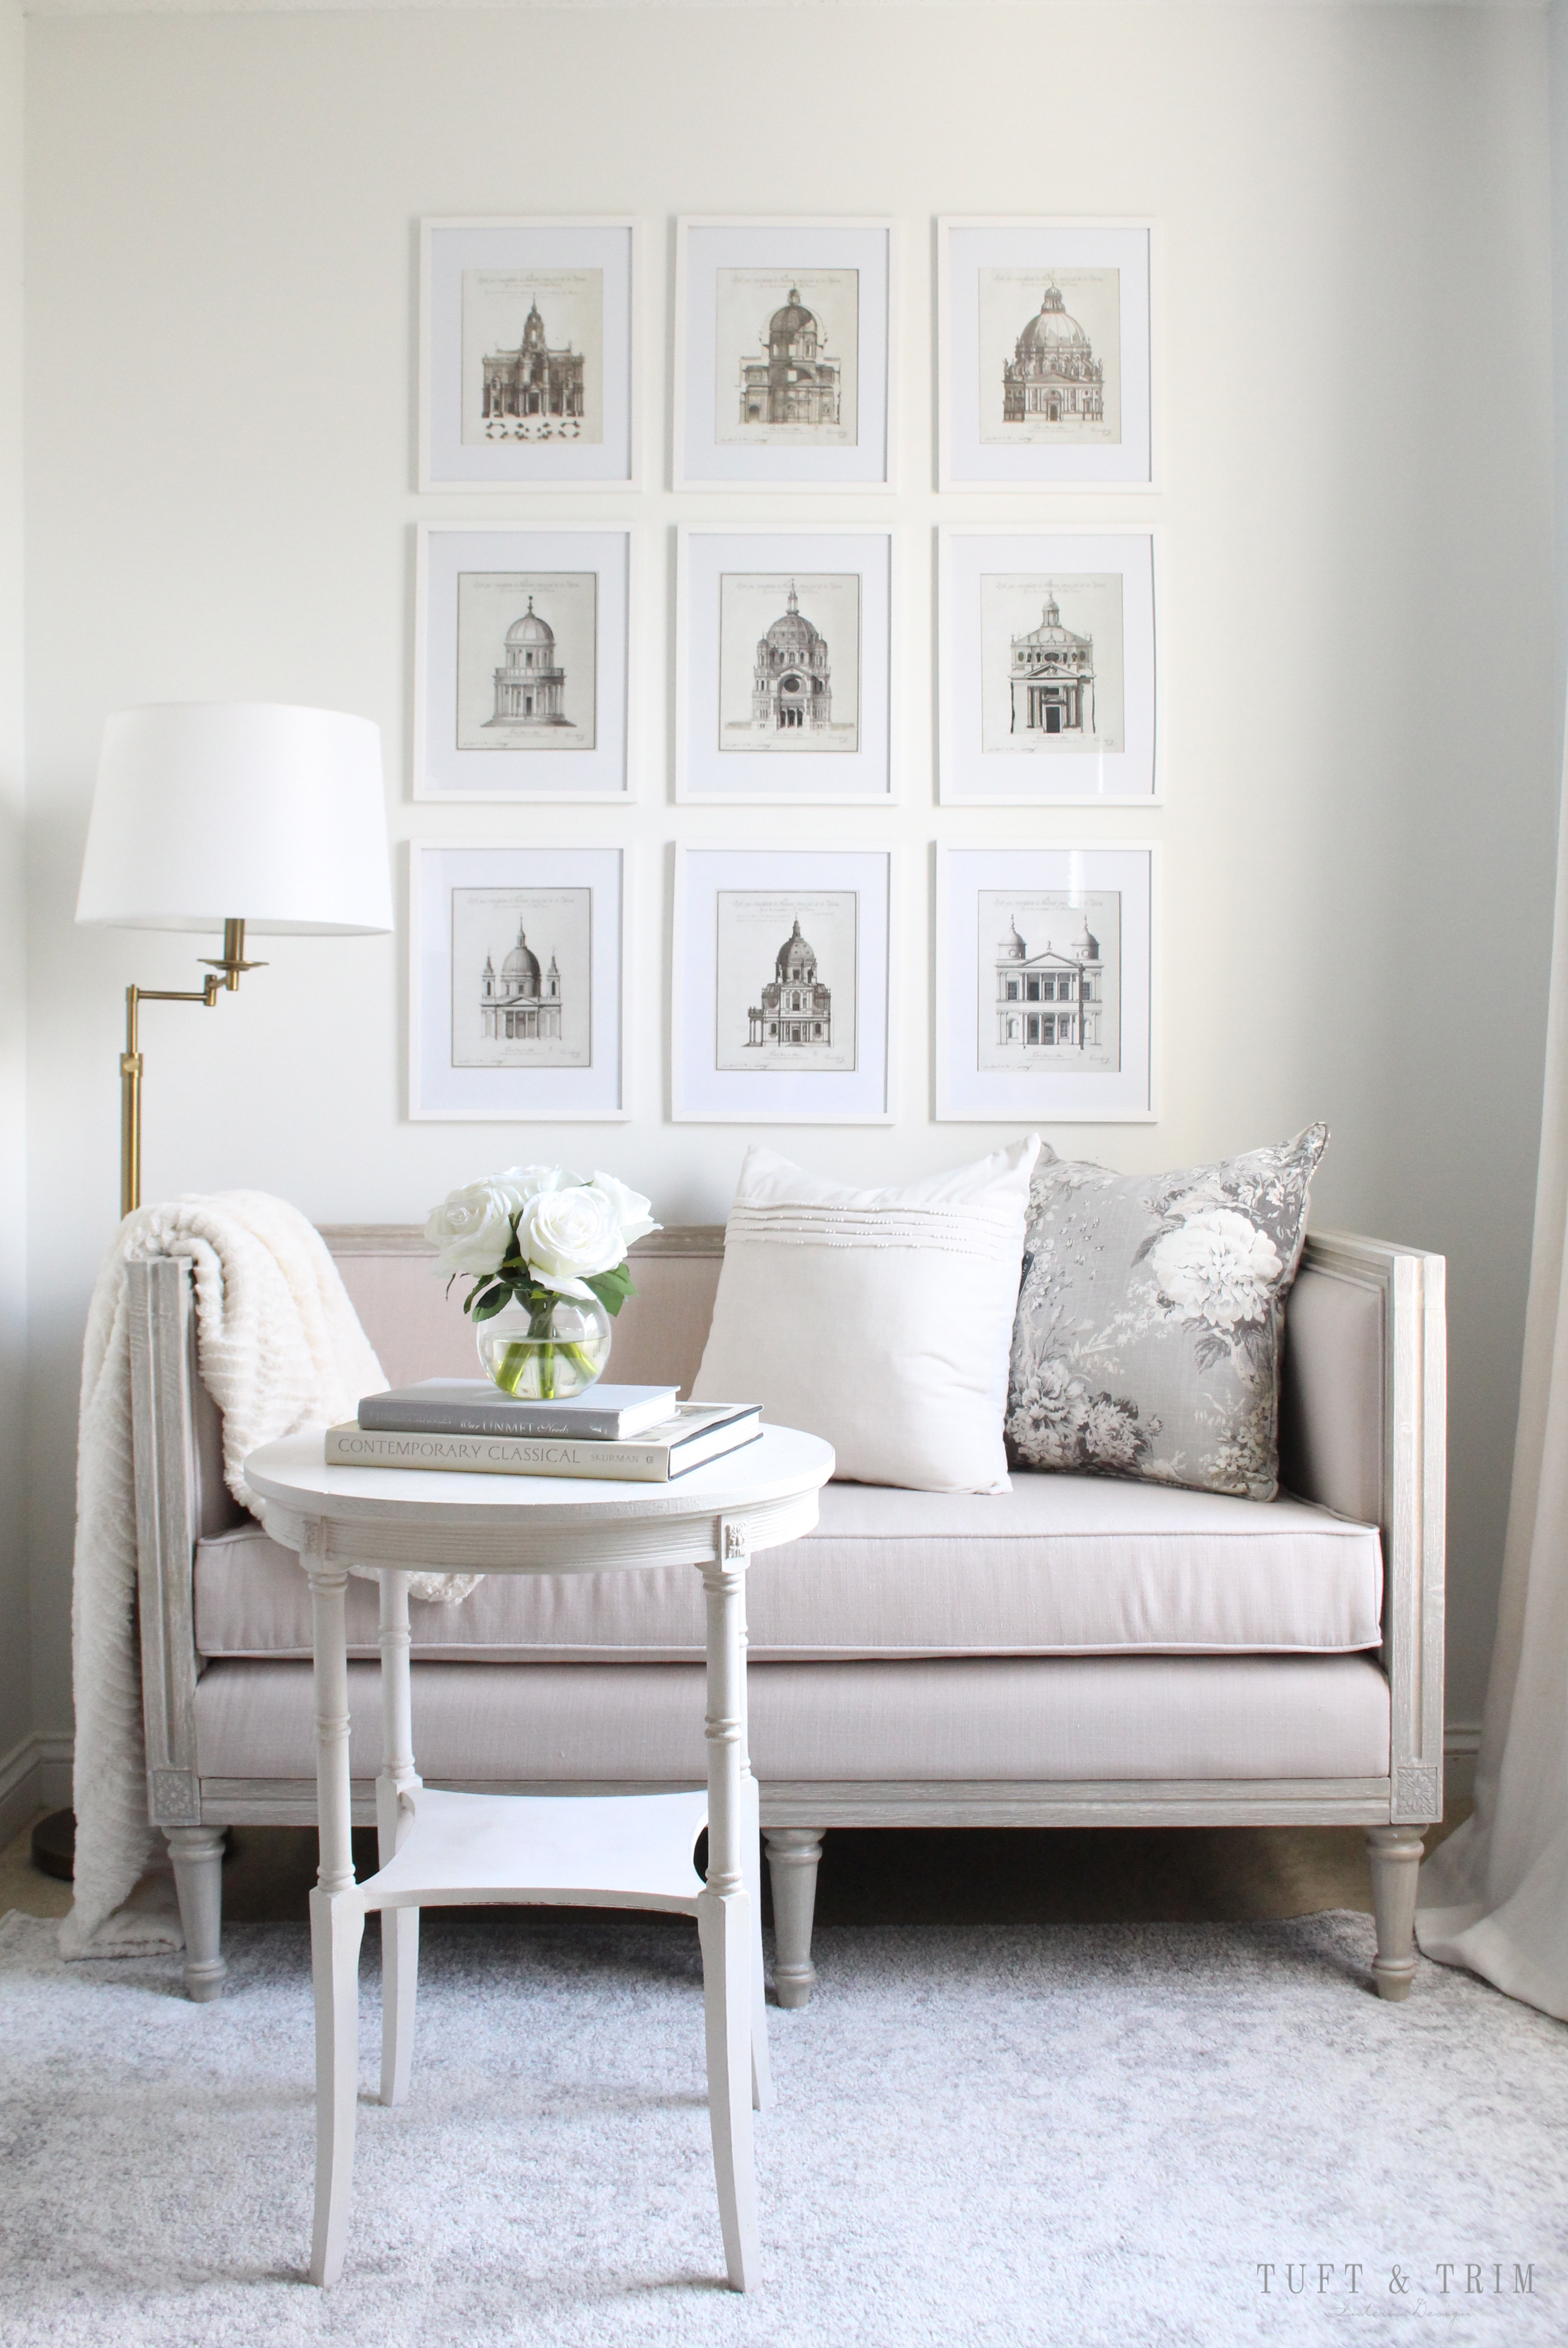 French Country Chic Reading Nook by Tuft & Trim Interior Design